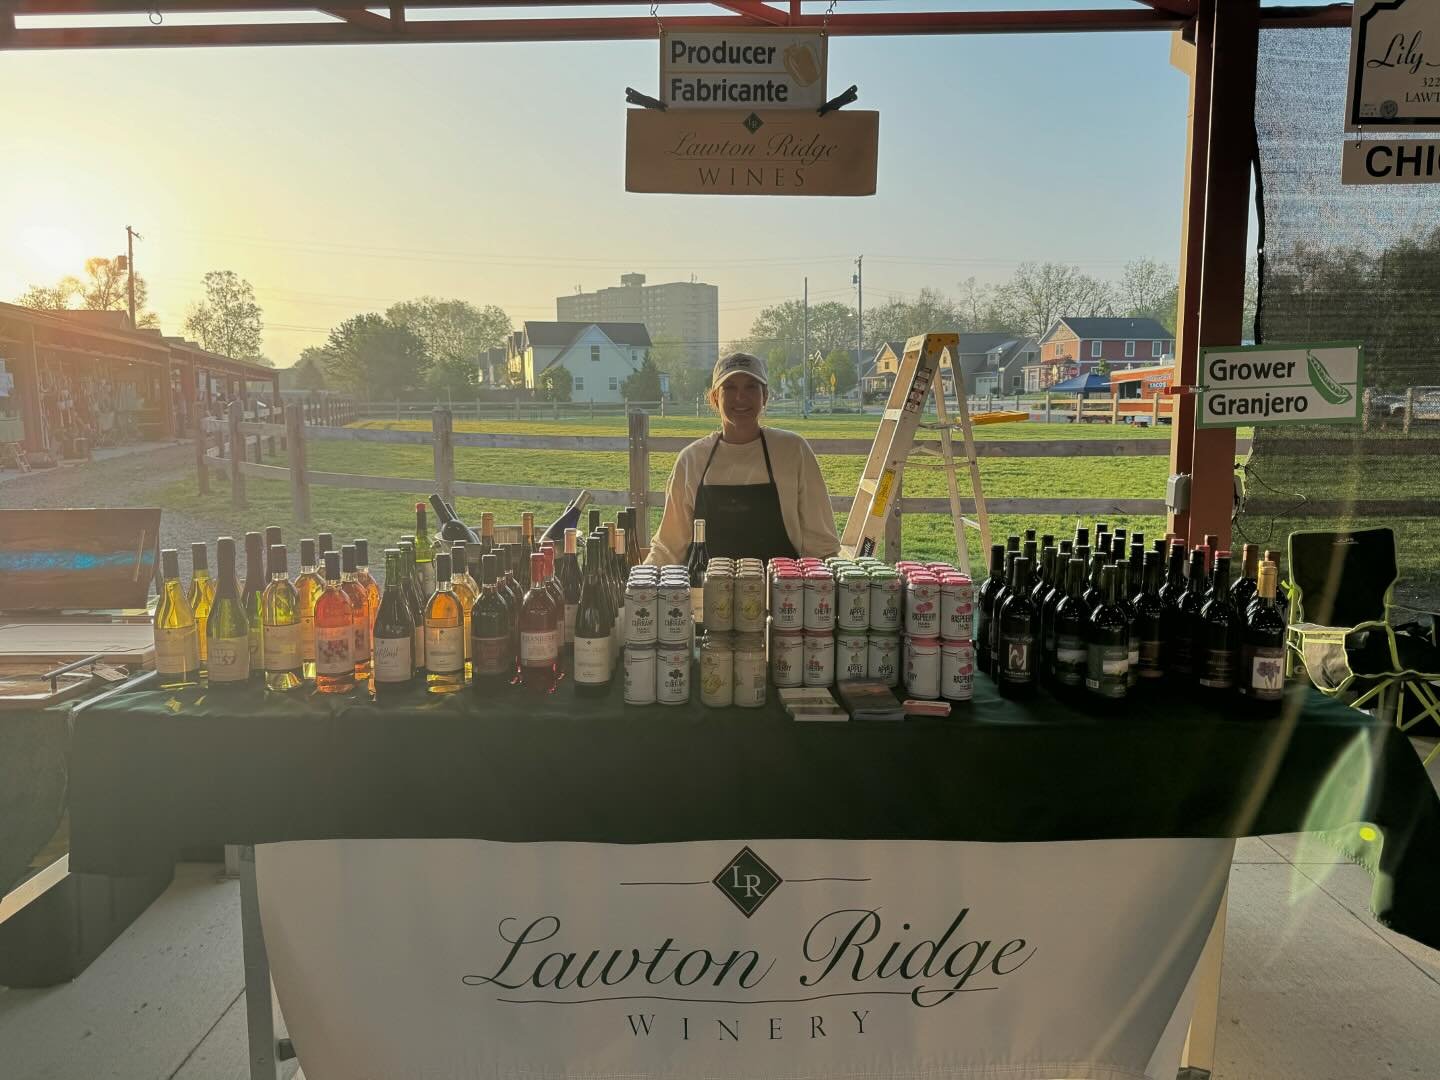 Come season us at the Kalamazoo Farmers&rsquo; Market! The season kicks off today, Saturday, May 4 and runs through November. We will be there from 7 am to 1 pm each Saturday with samples, bottles, and cans of wine and cider. We hope to meet you ther